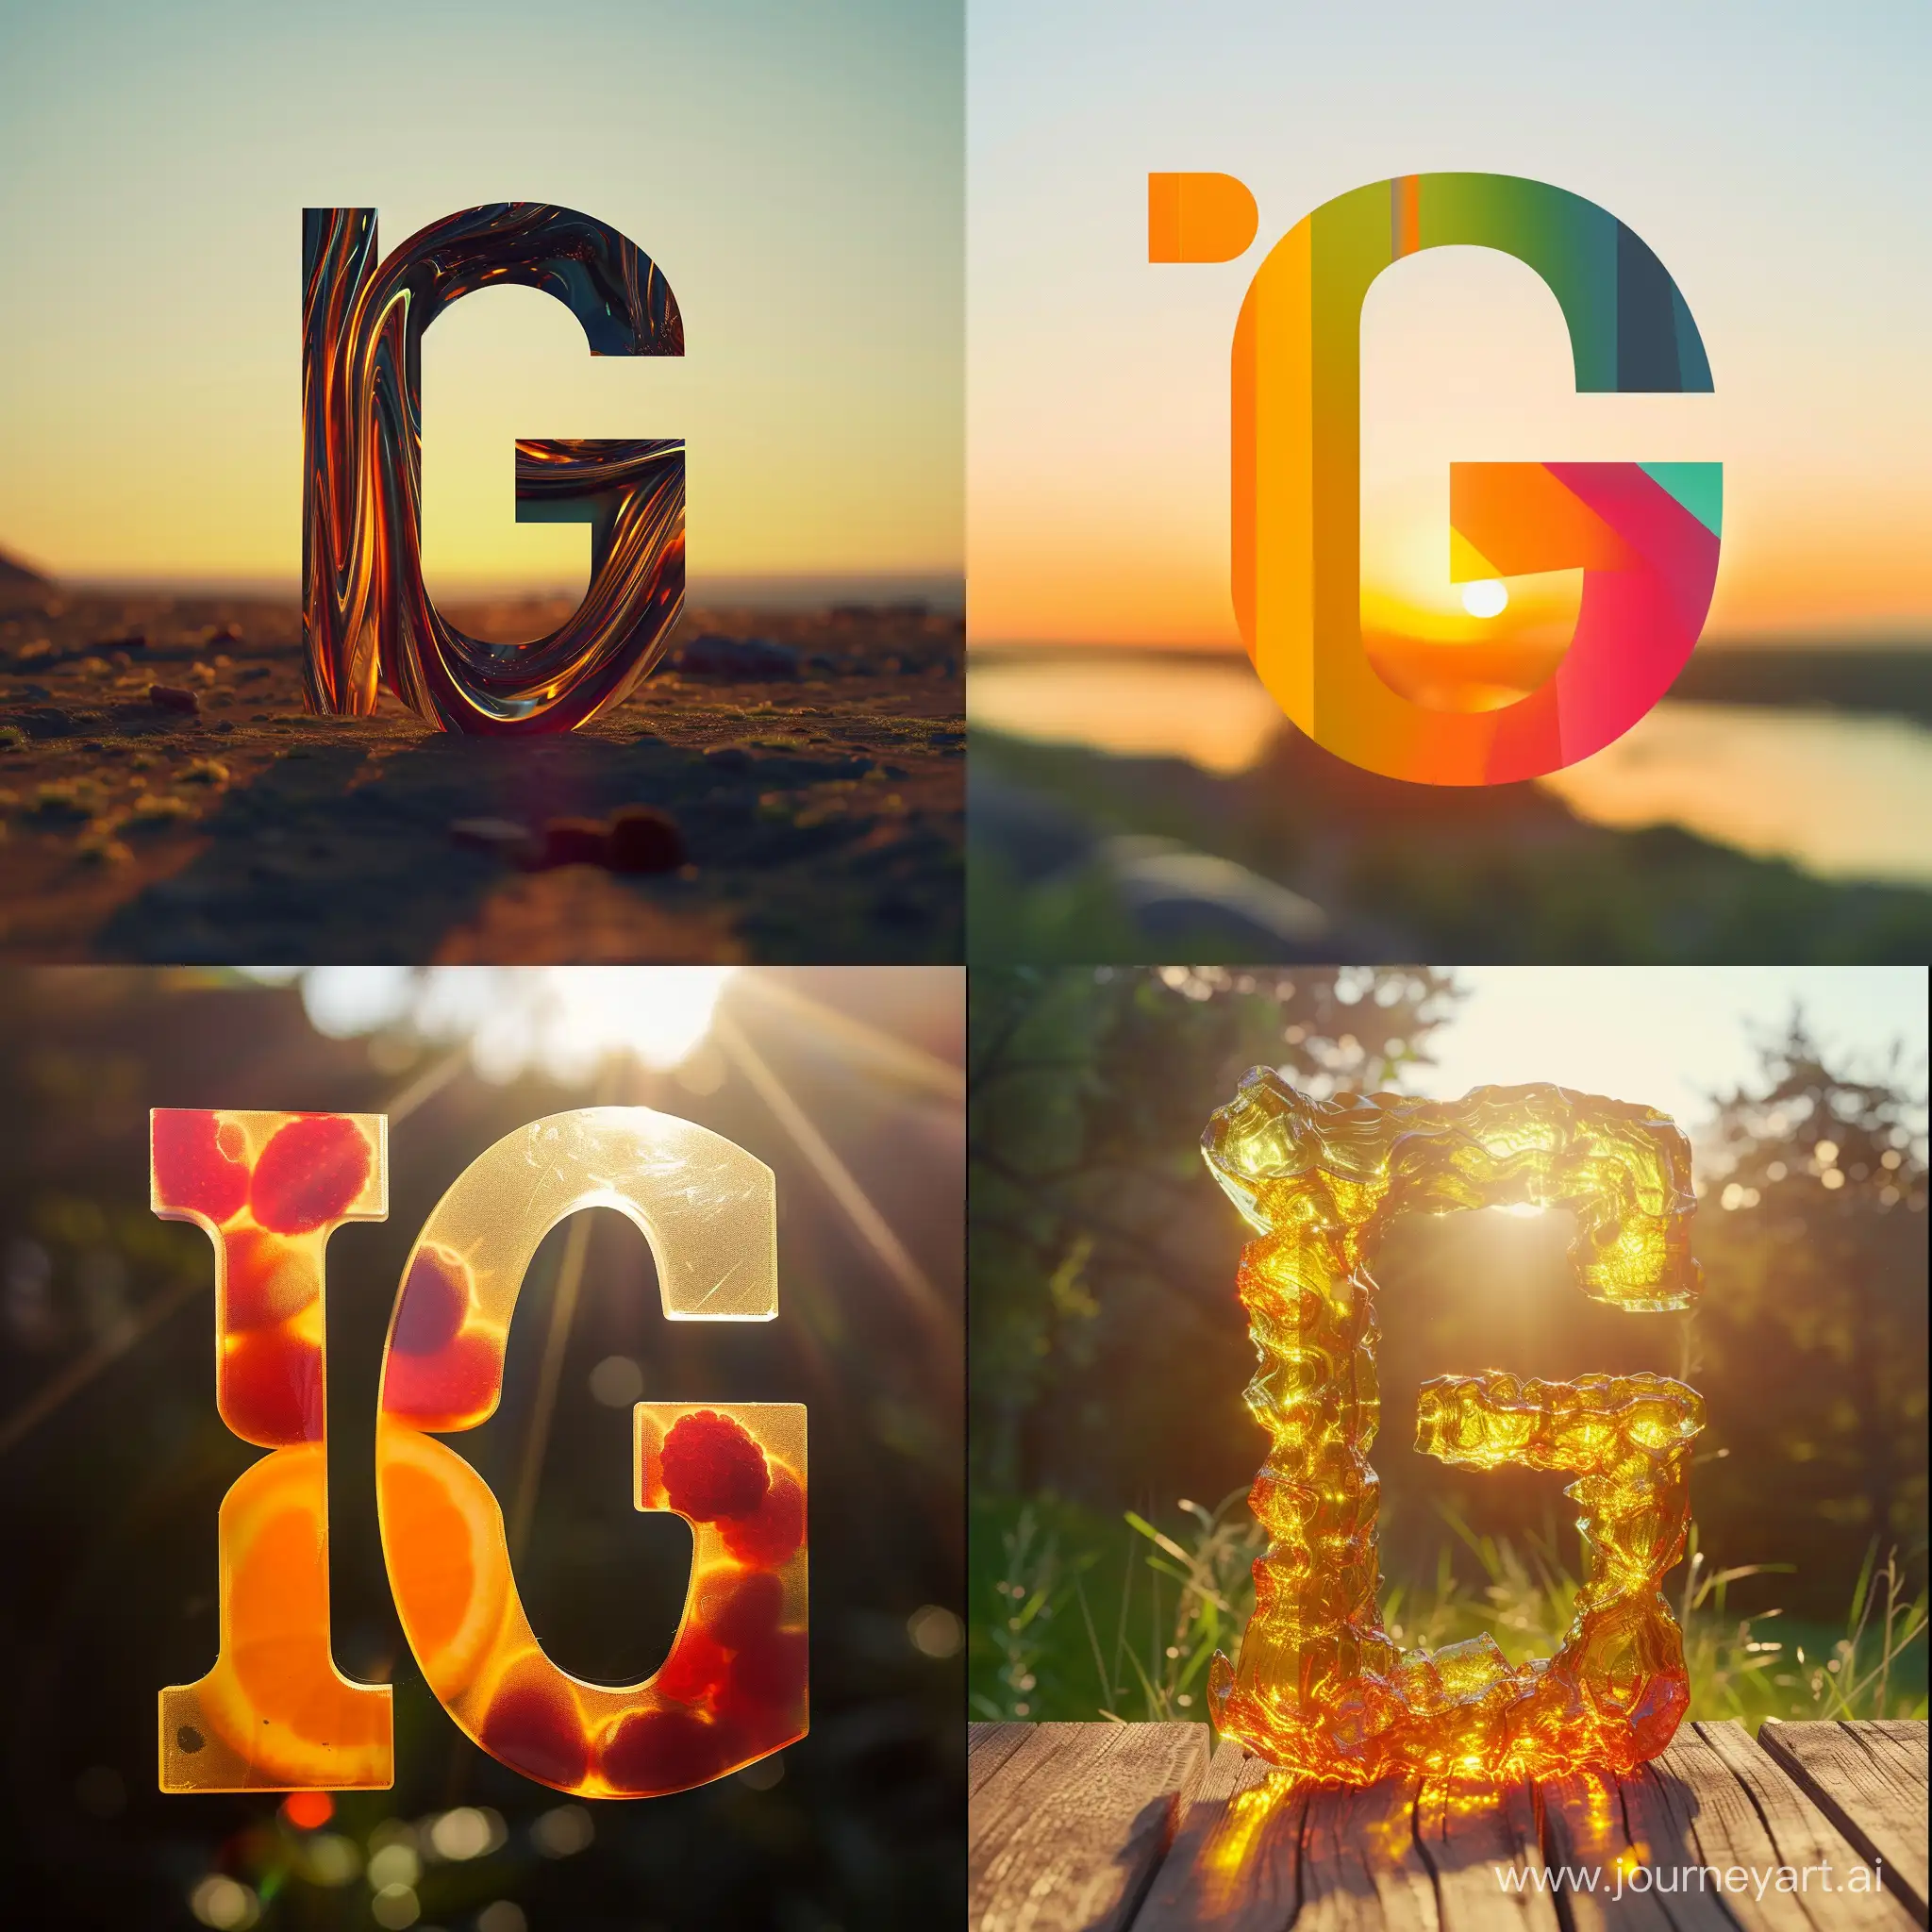 Lettermark logo with a dynamic arrangement of "I" and "G" expressing vitality, Energy, Nutrition, Vibrant, Synergy, Wellness, DSLR, Wide-angle lens, Midday for bright, natural lighting, Modern and energetic, N/A (Digital)